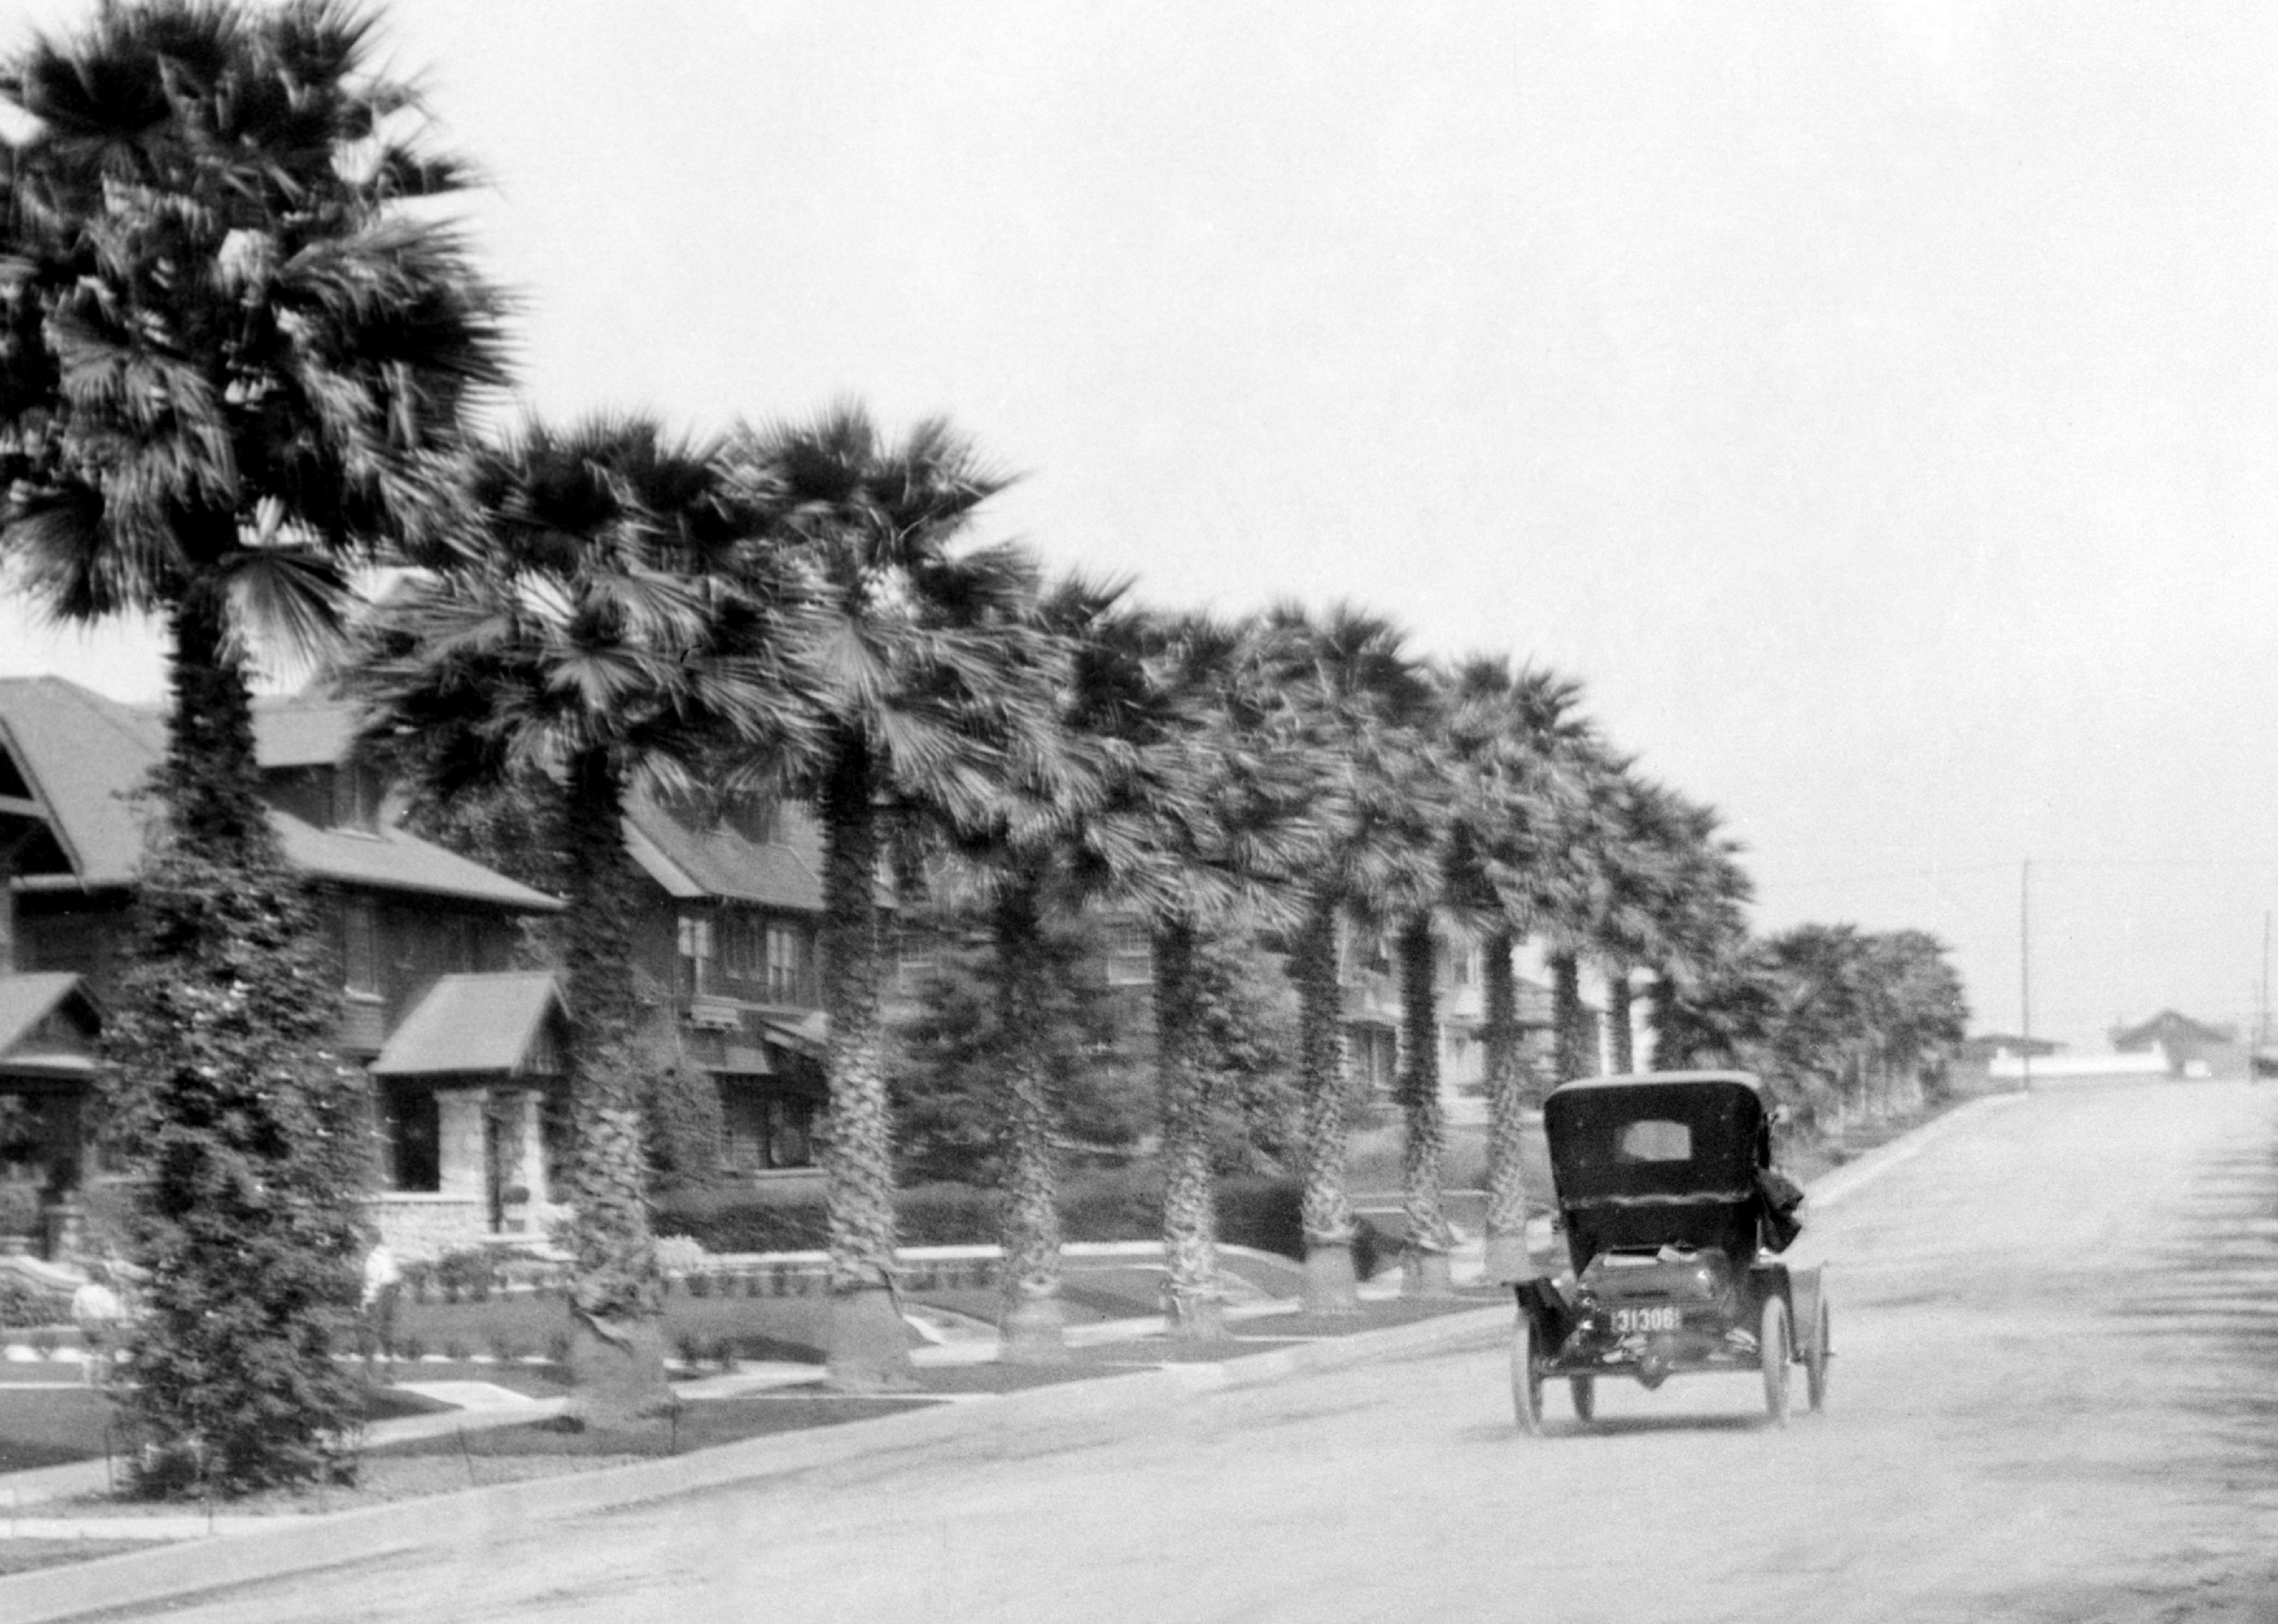 <p>In the early 20th century, when most roads were still unpaved, road trips were a much dirtier, dustier affair. It wasn't until the 1956 Federal-Aid Highway Act, which called for uniformity in the nation's major thruways, was passed that many of these oft-traveled highways and byways were finally covered in asphalt.</p>